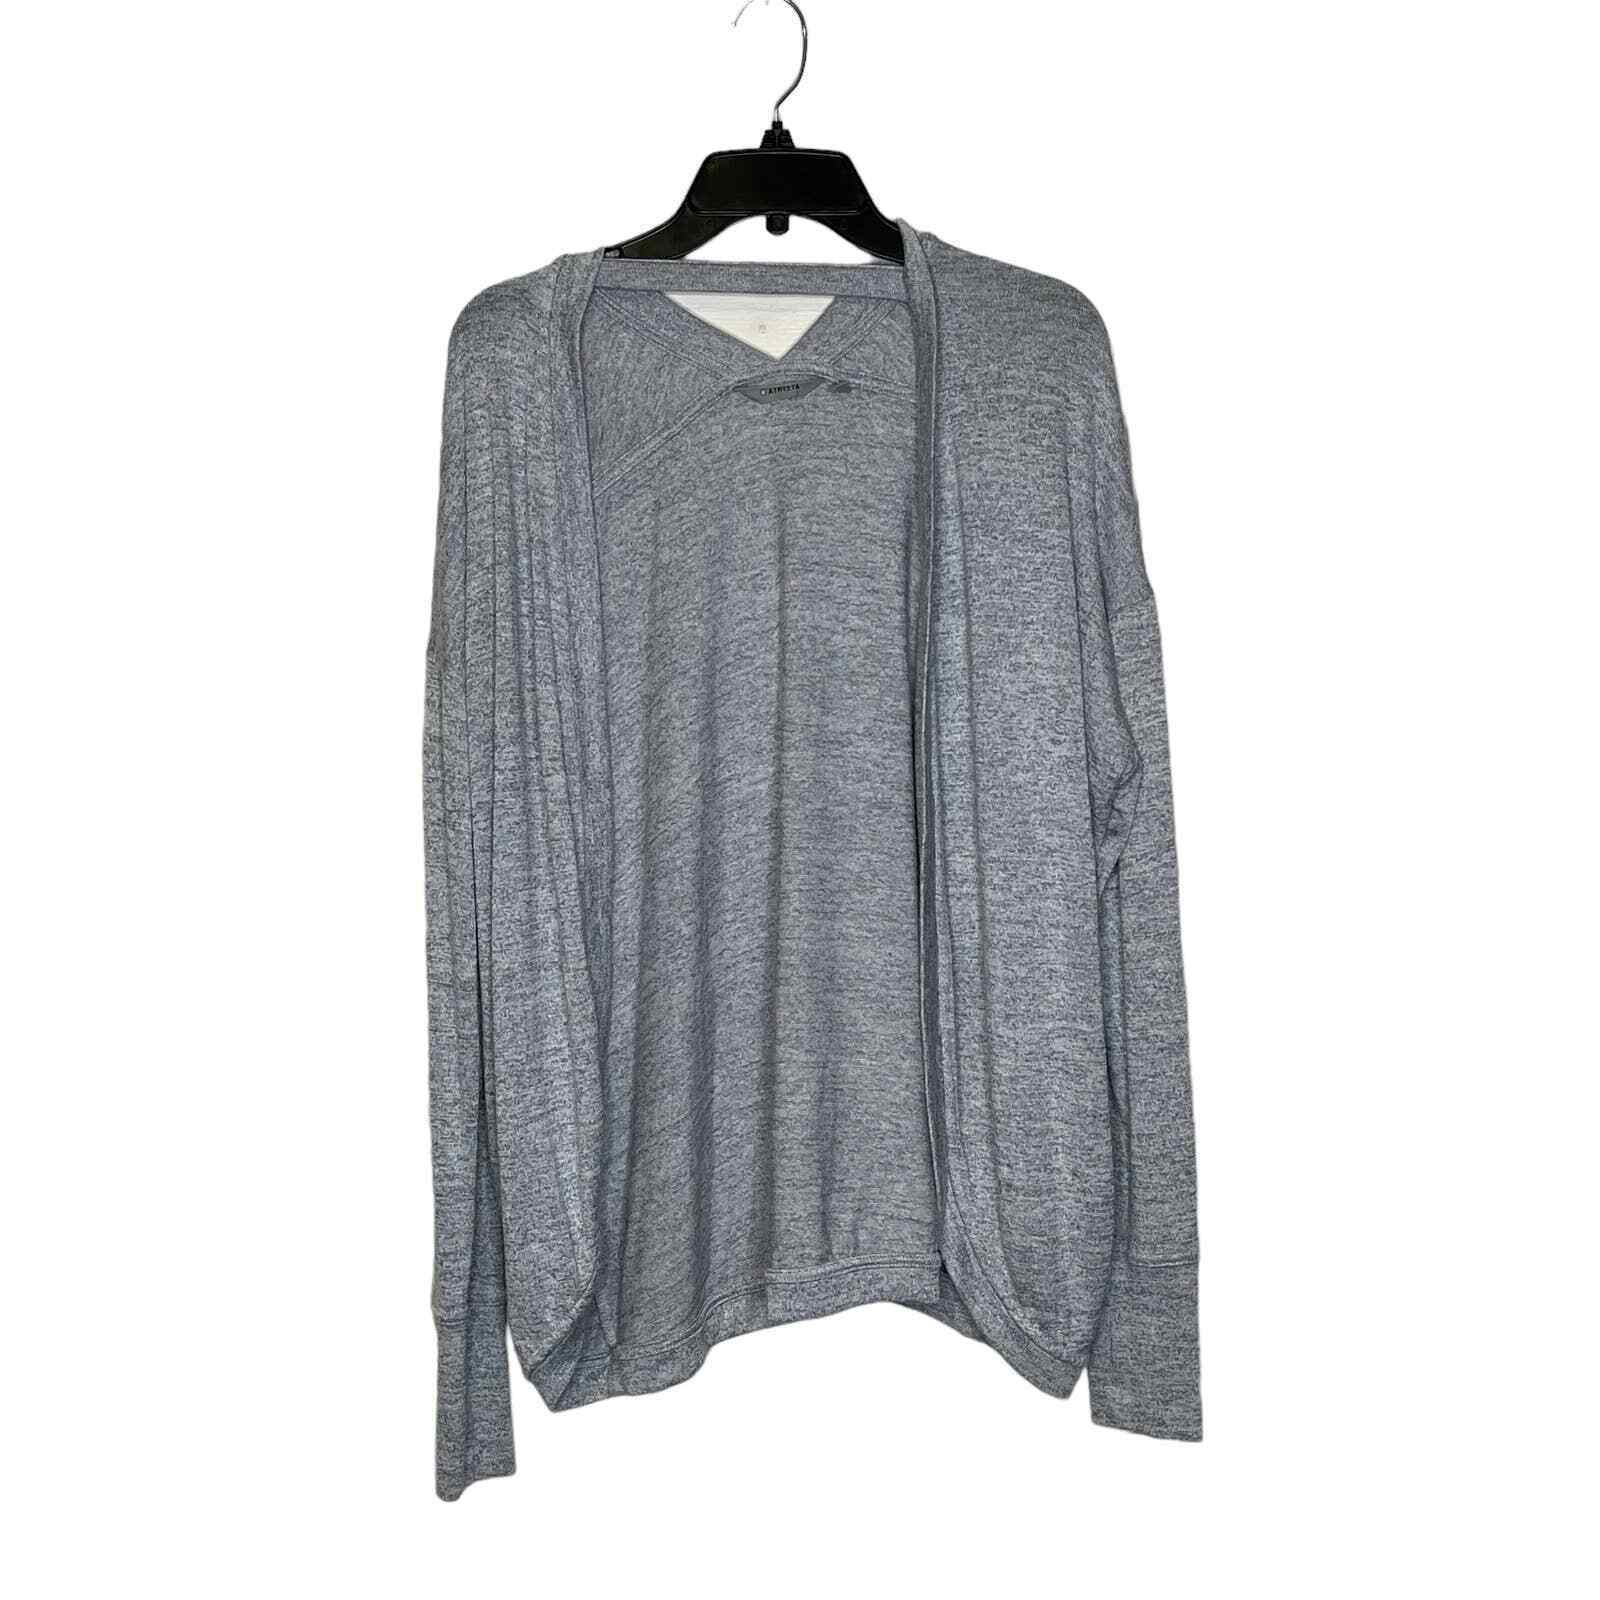 Primary image for Athleta Open Cardigan Size Small Gray Heather Stretch Blend Womens Top